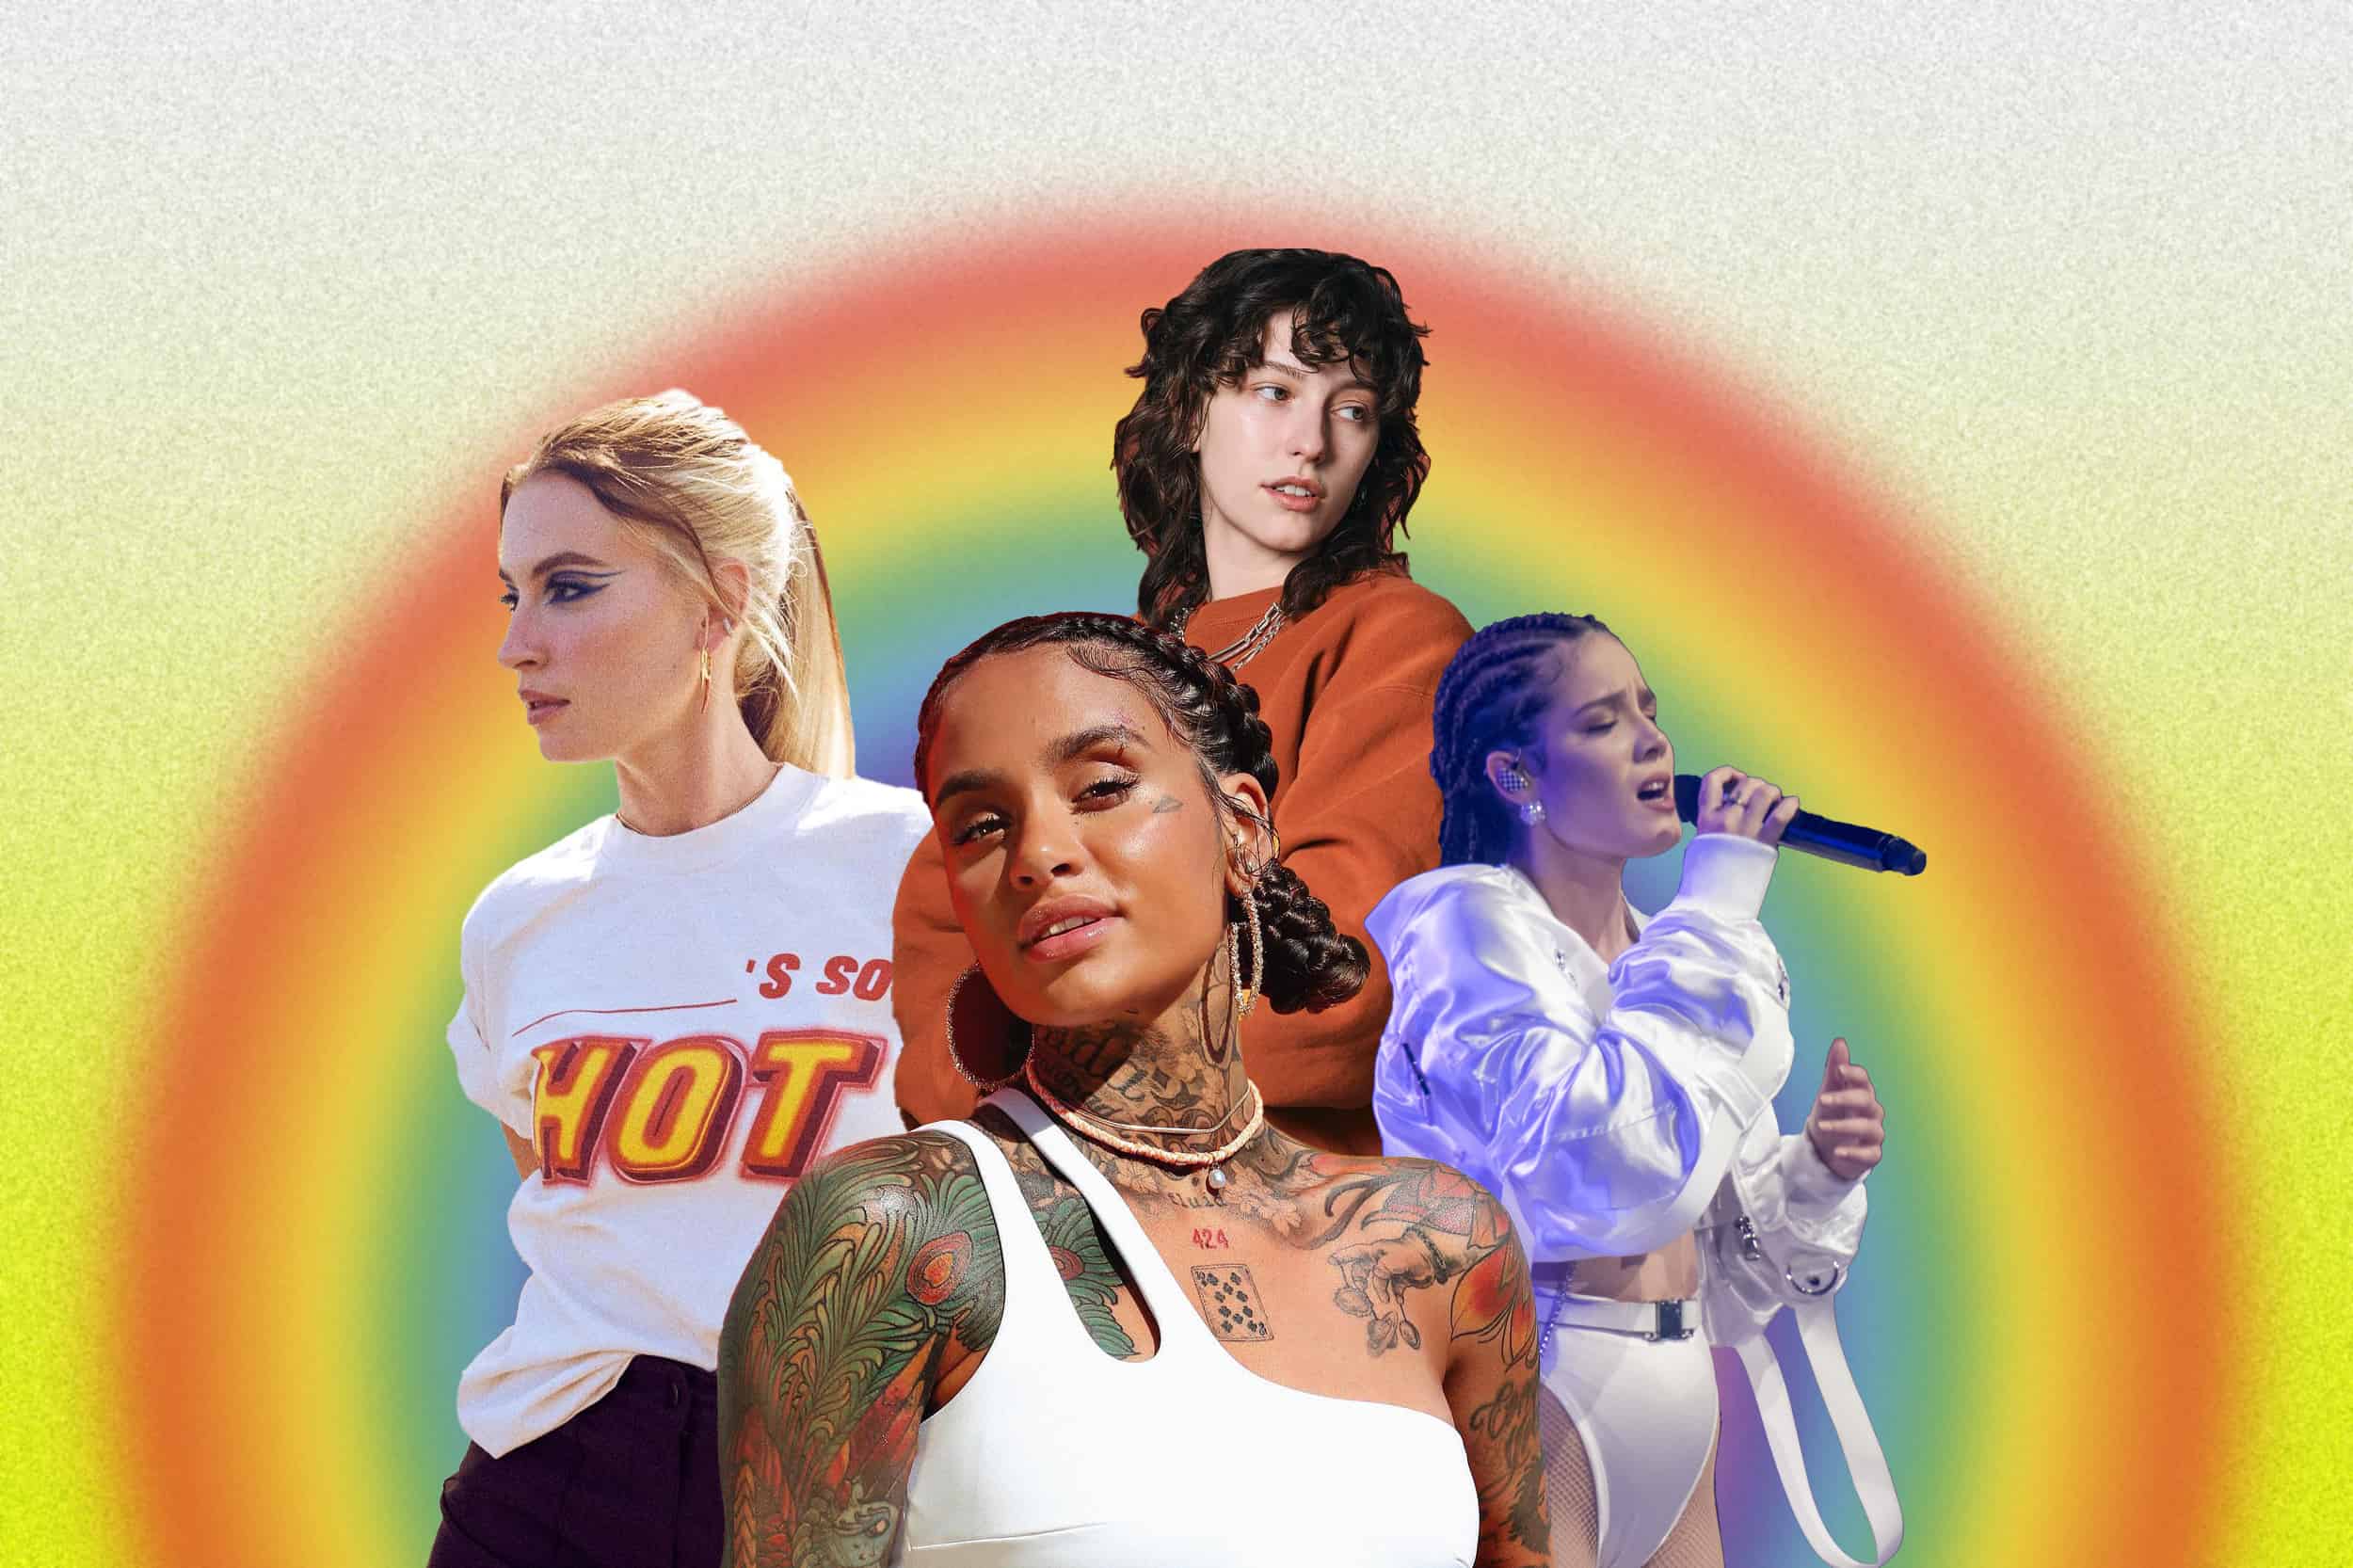 Talented Queer Lesbian Singers